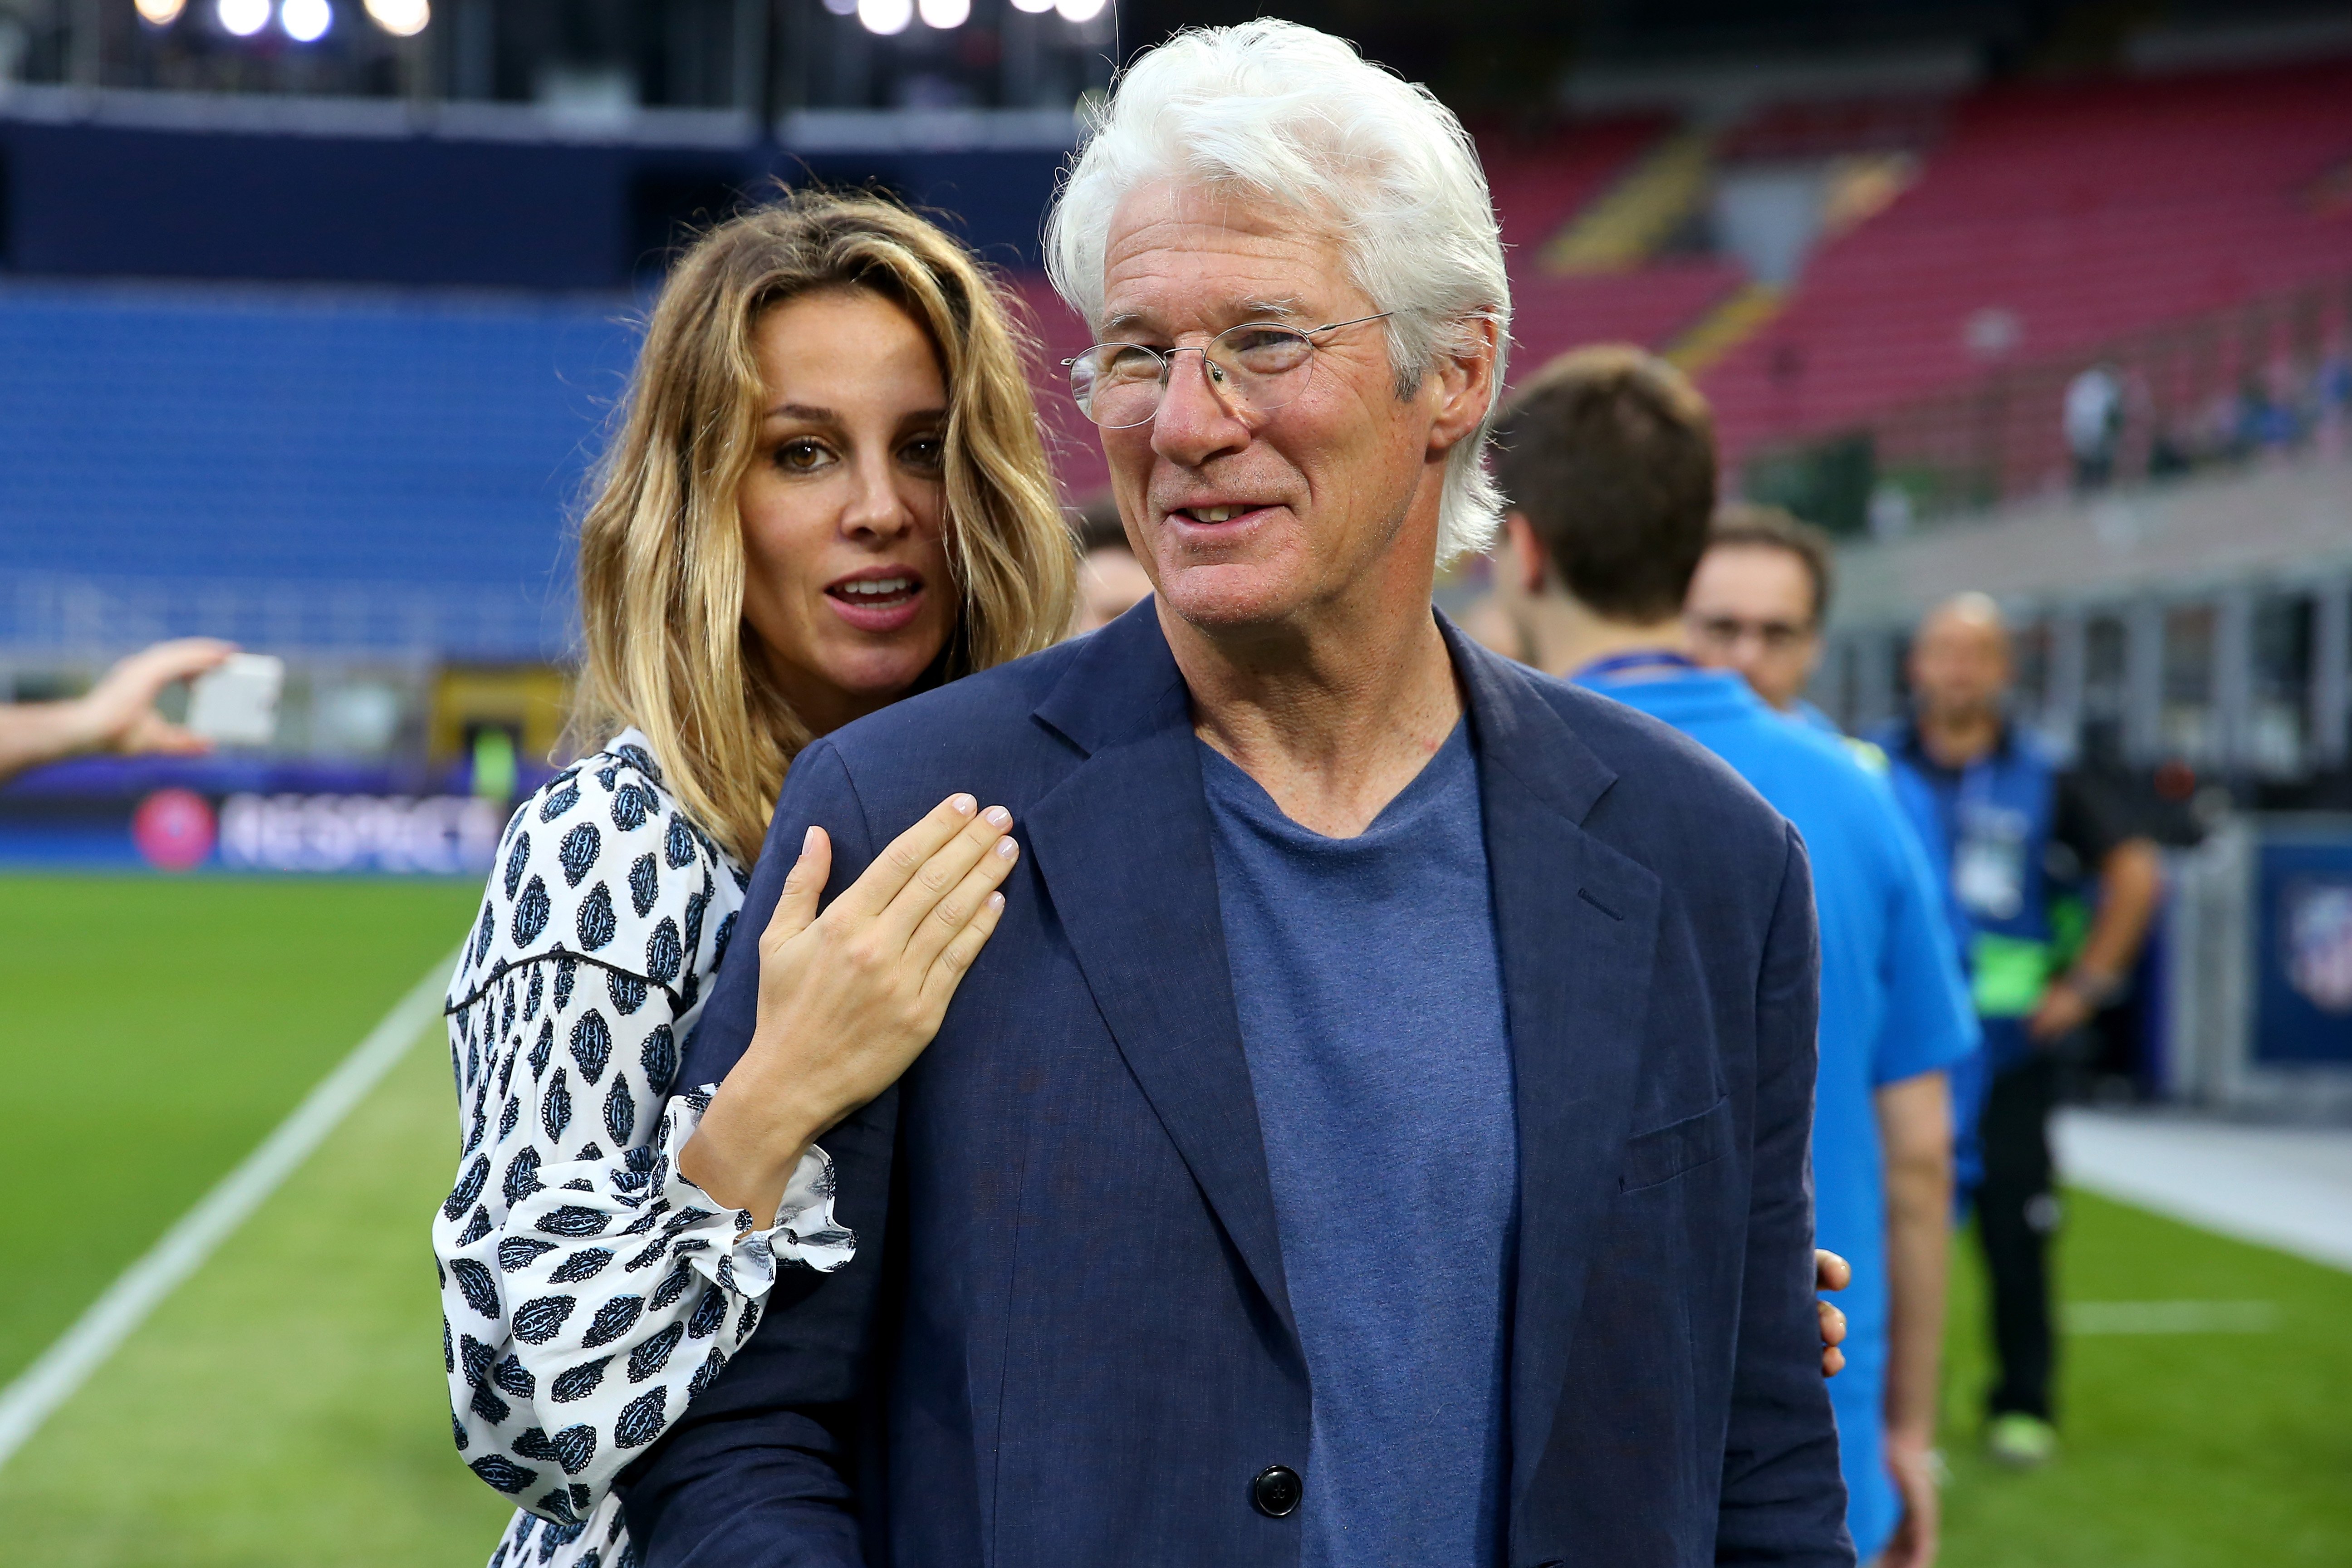 Richard Gere and Alejandra Silva at Stadio Giuseppe Meazza on May 27, 2016 in Milan, Italy | Source: Getty Images